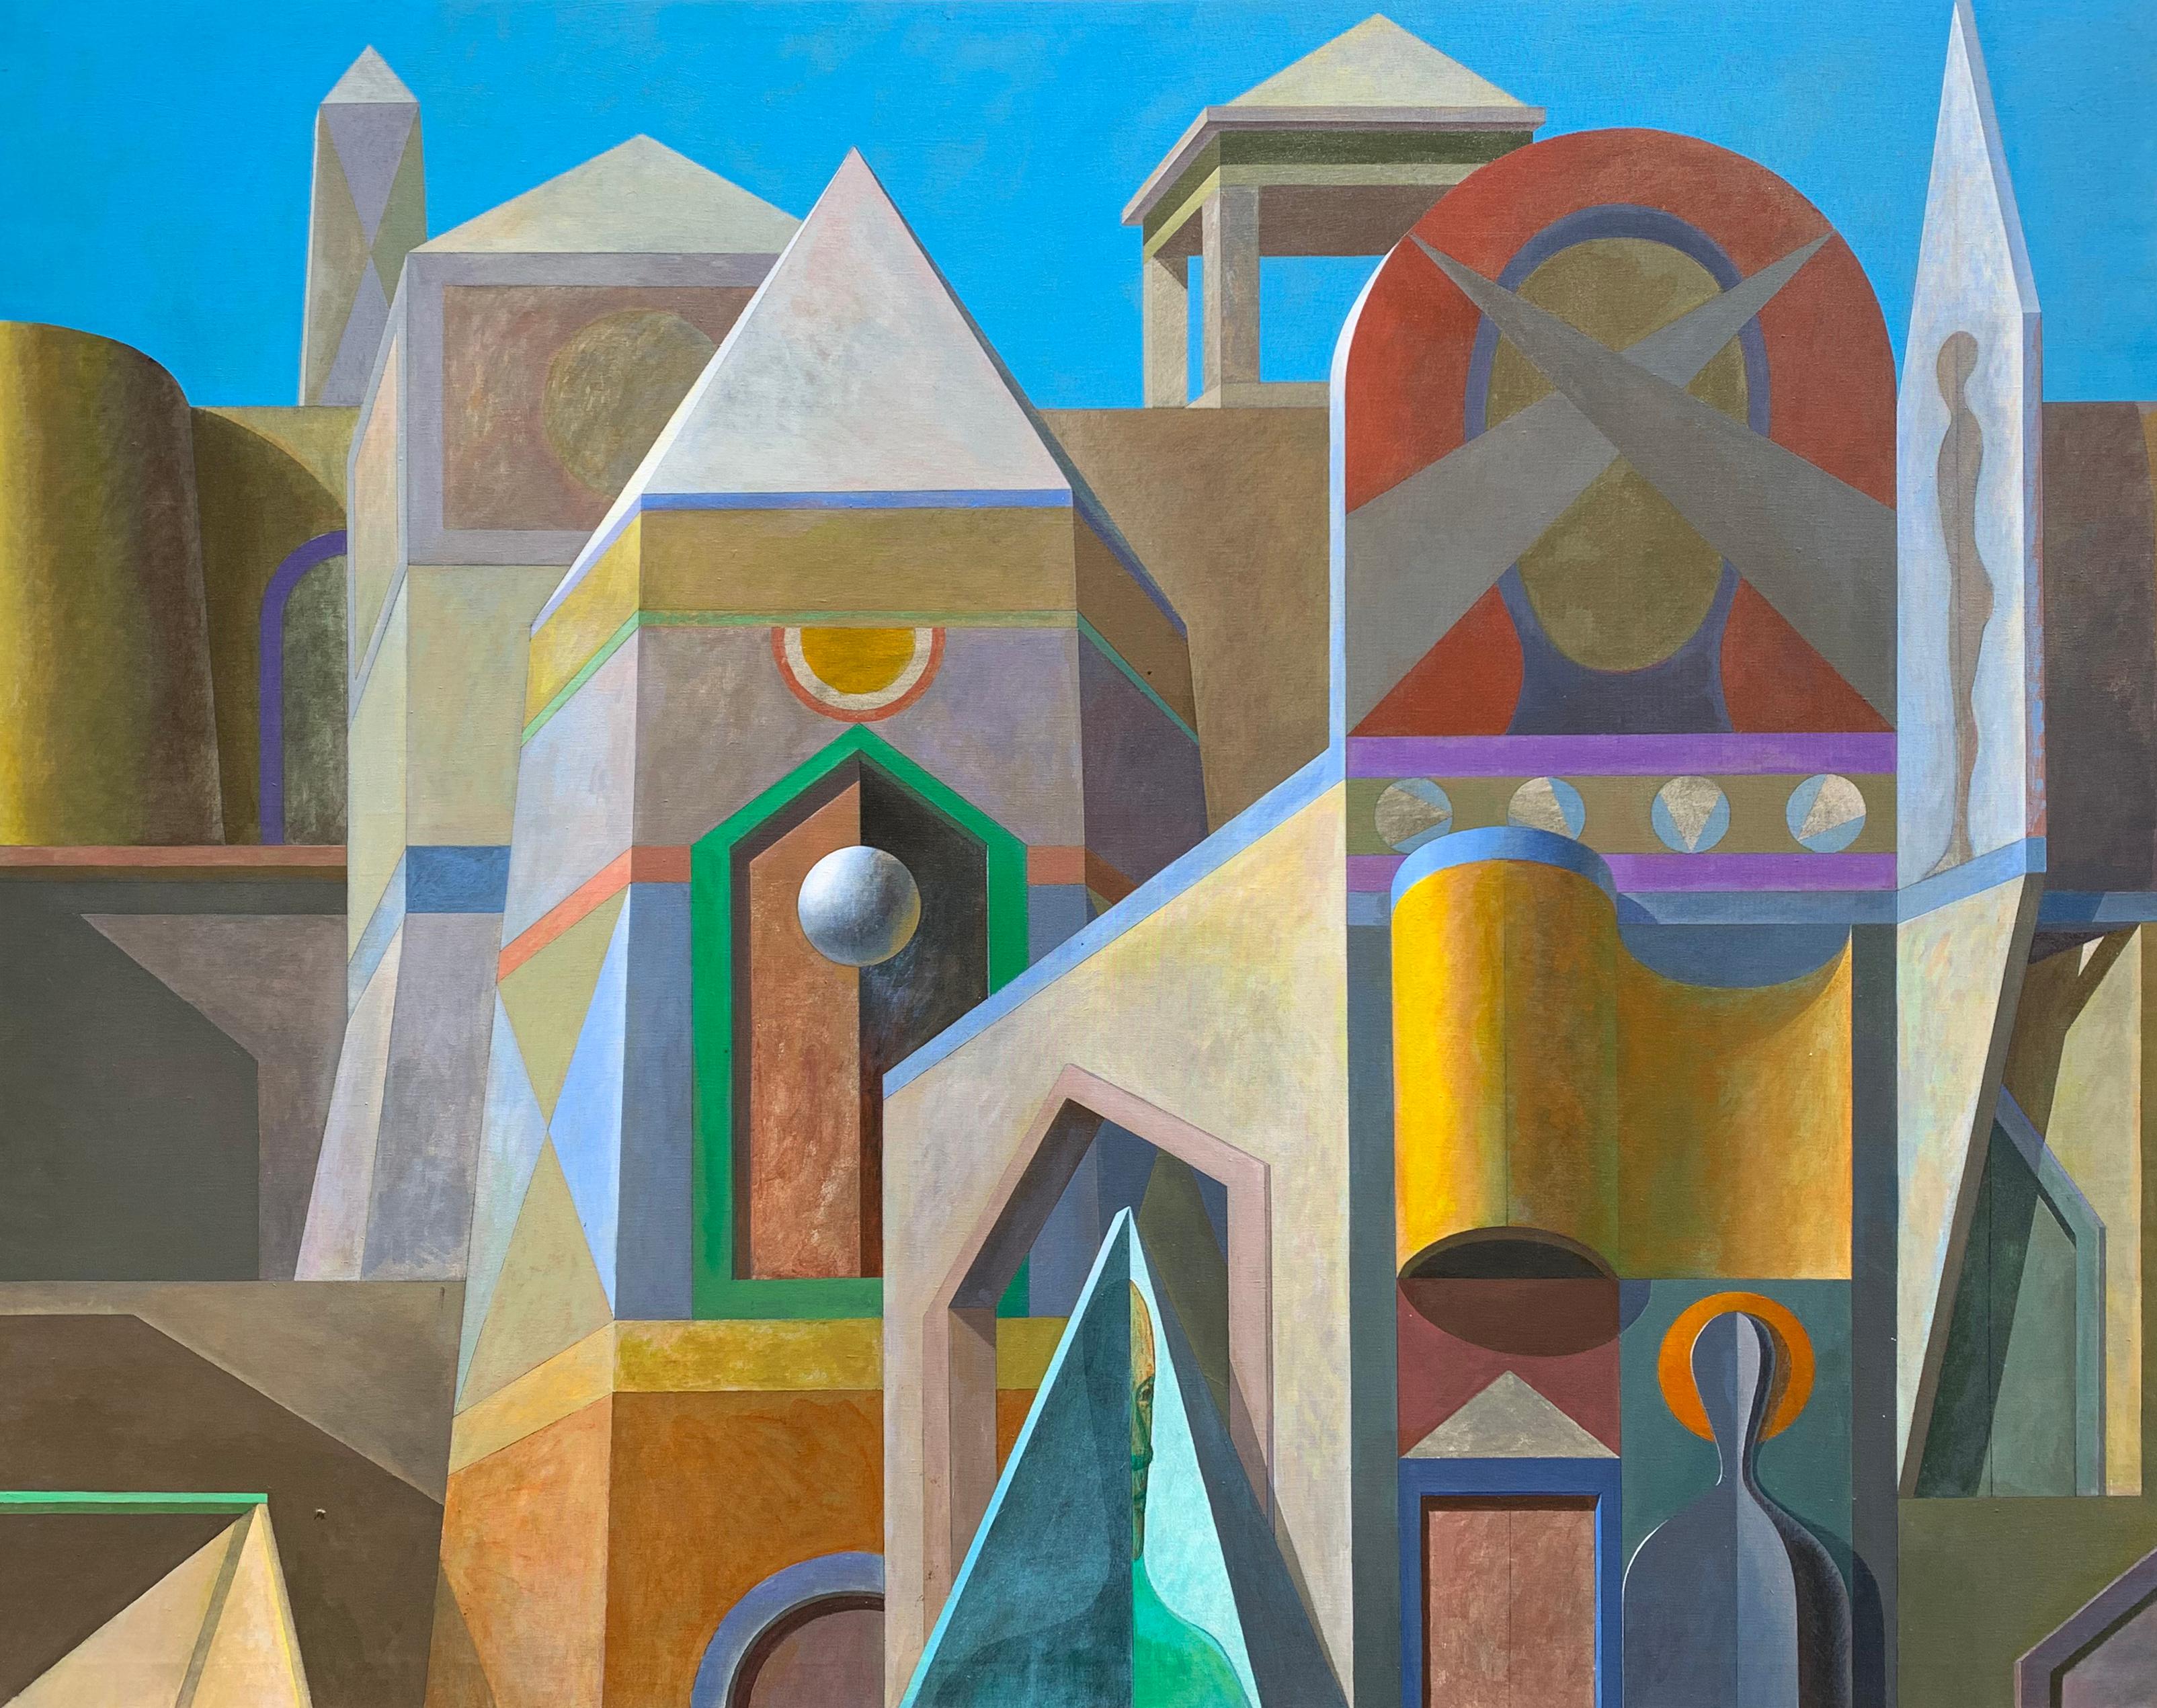 Joseph Amarotico Abstract Painting - Architectural Abstract, Geometric Forms in Color, Modernist Mural, Oil on Canvas